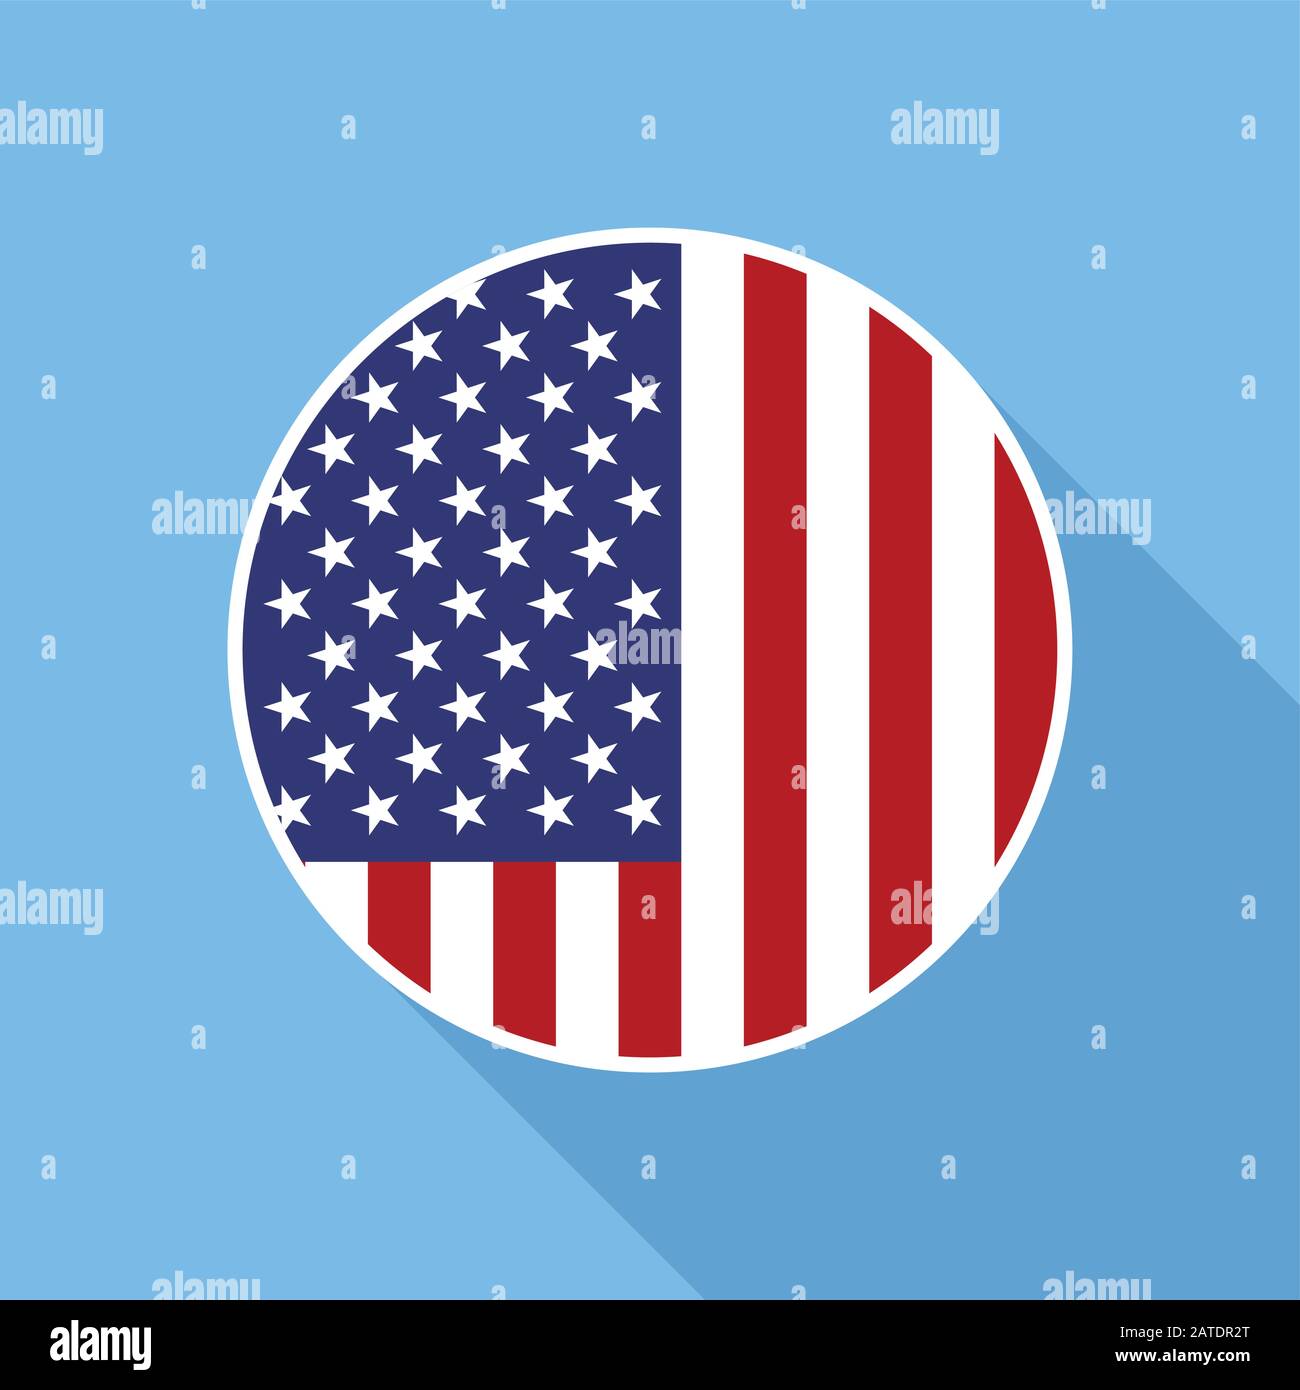 USA national flag vector flat icon. Vector icon of American flag clipped inside circle. Flat icon with star-spangled banner in flat style with long sh Stock Vector